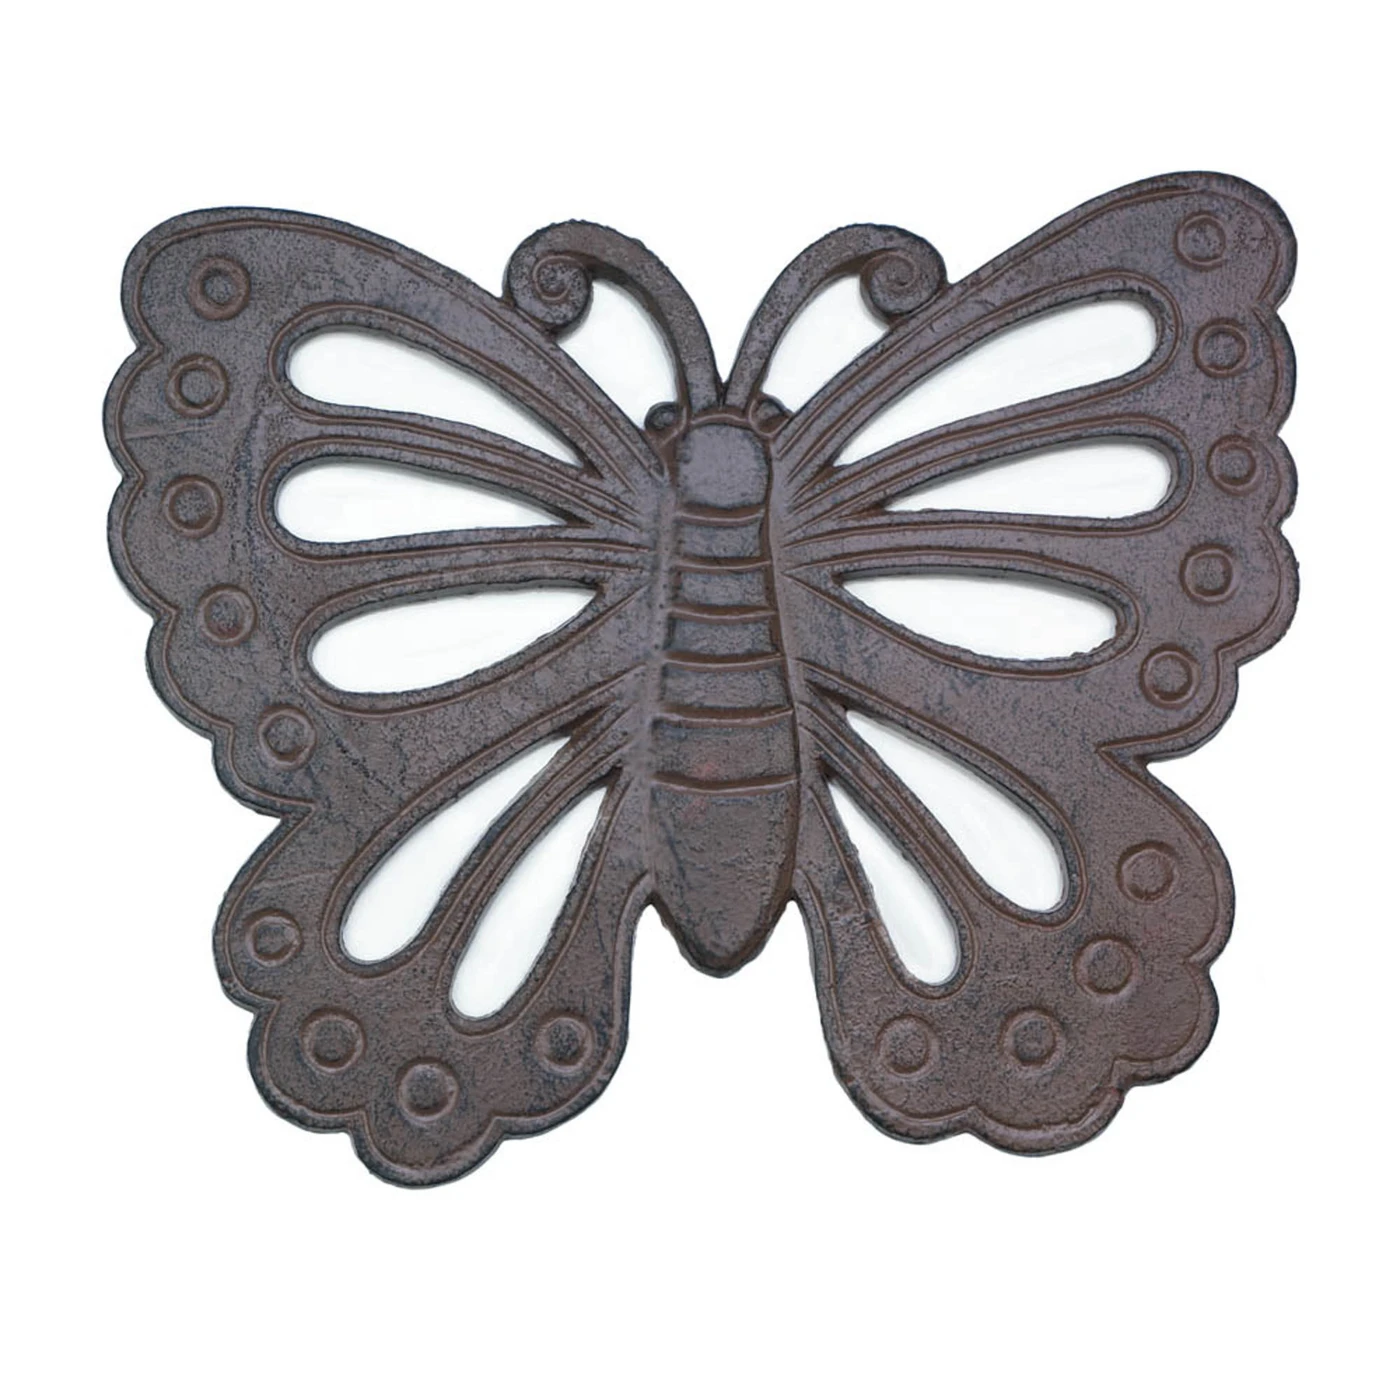 Butterfly Stepping Stone - $26.95